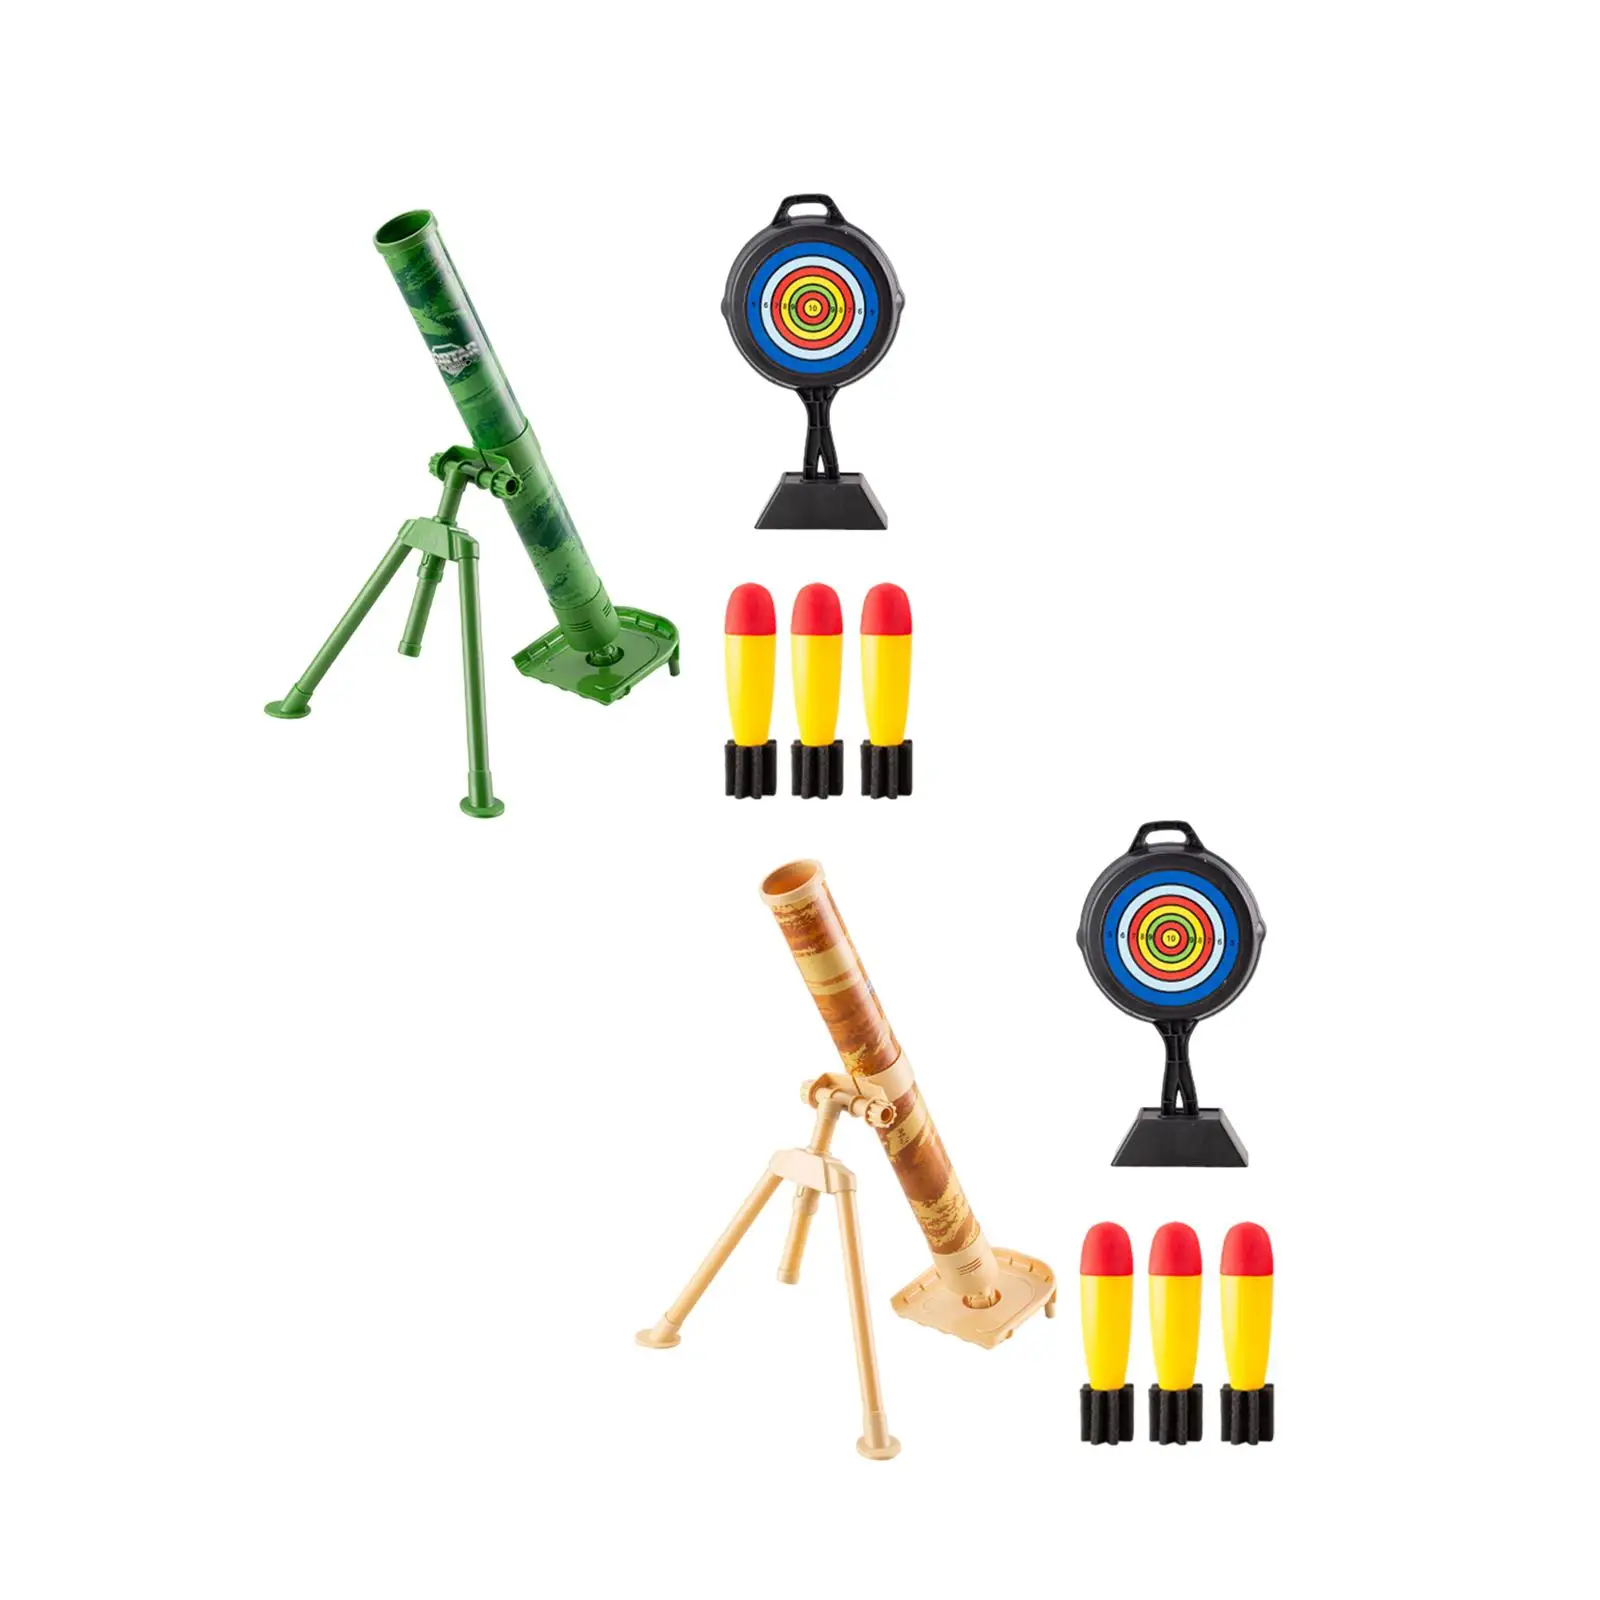 

Mortar Launcher Toy Set with Sound with 3 Safety Foam Shells Loading Bucket Launch Set for Boys and Girls Kids Birthday Gifts